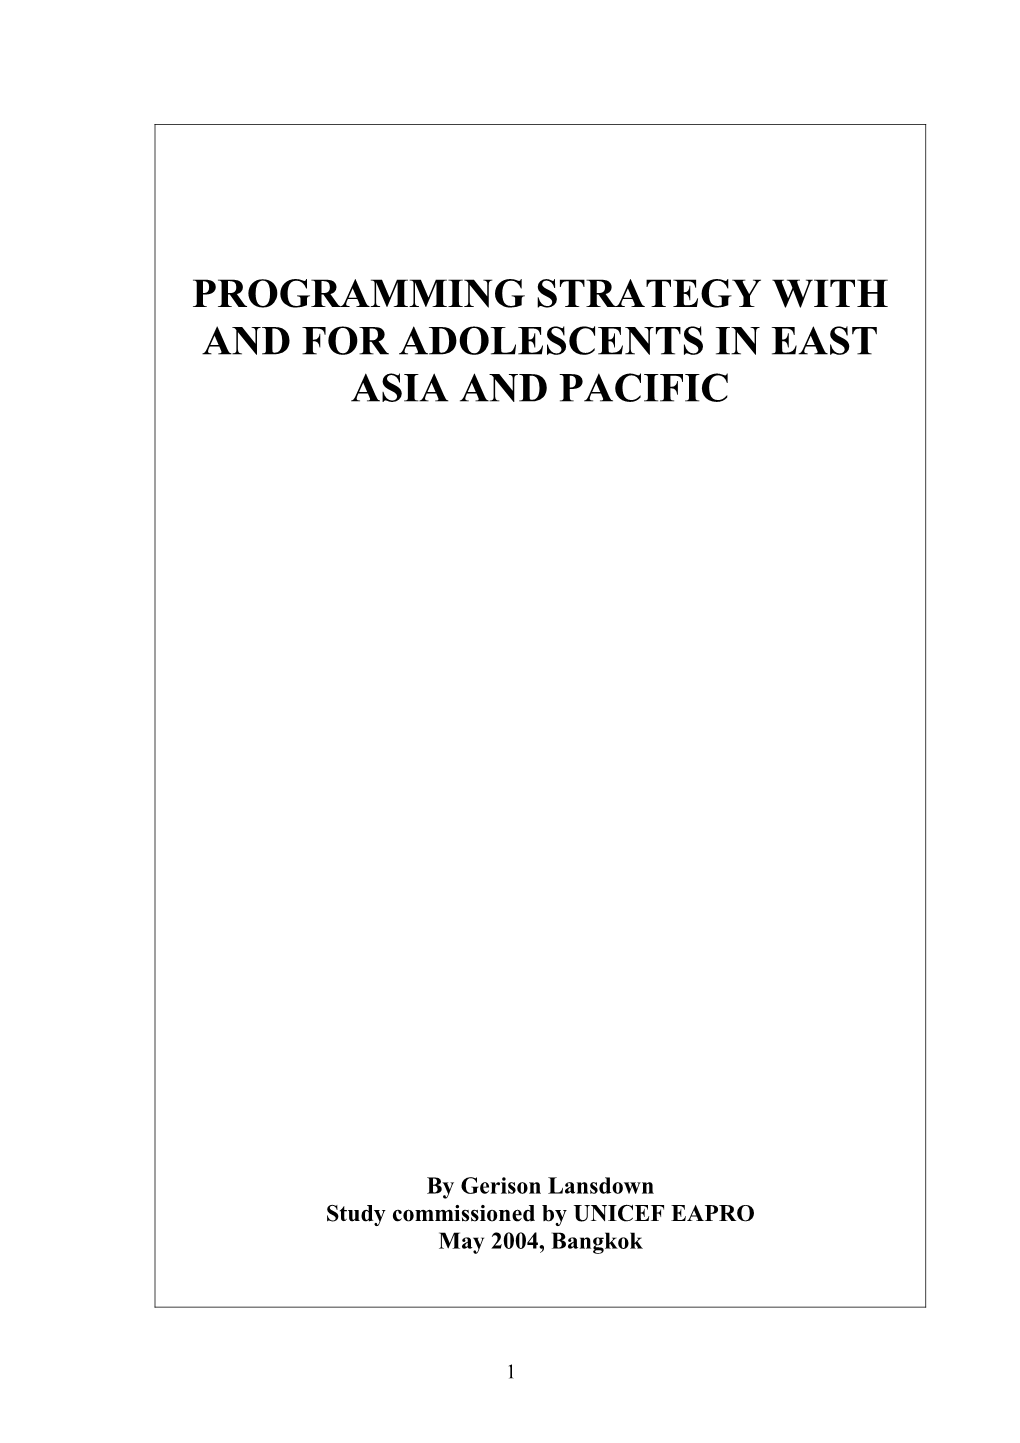 Programming Strategy with and for Adolescents in East Asia and Pacific